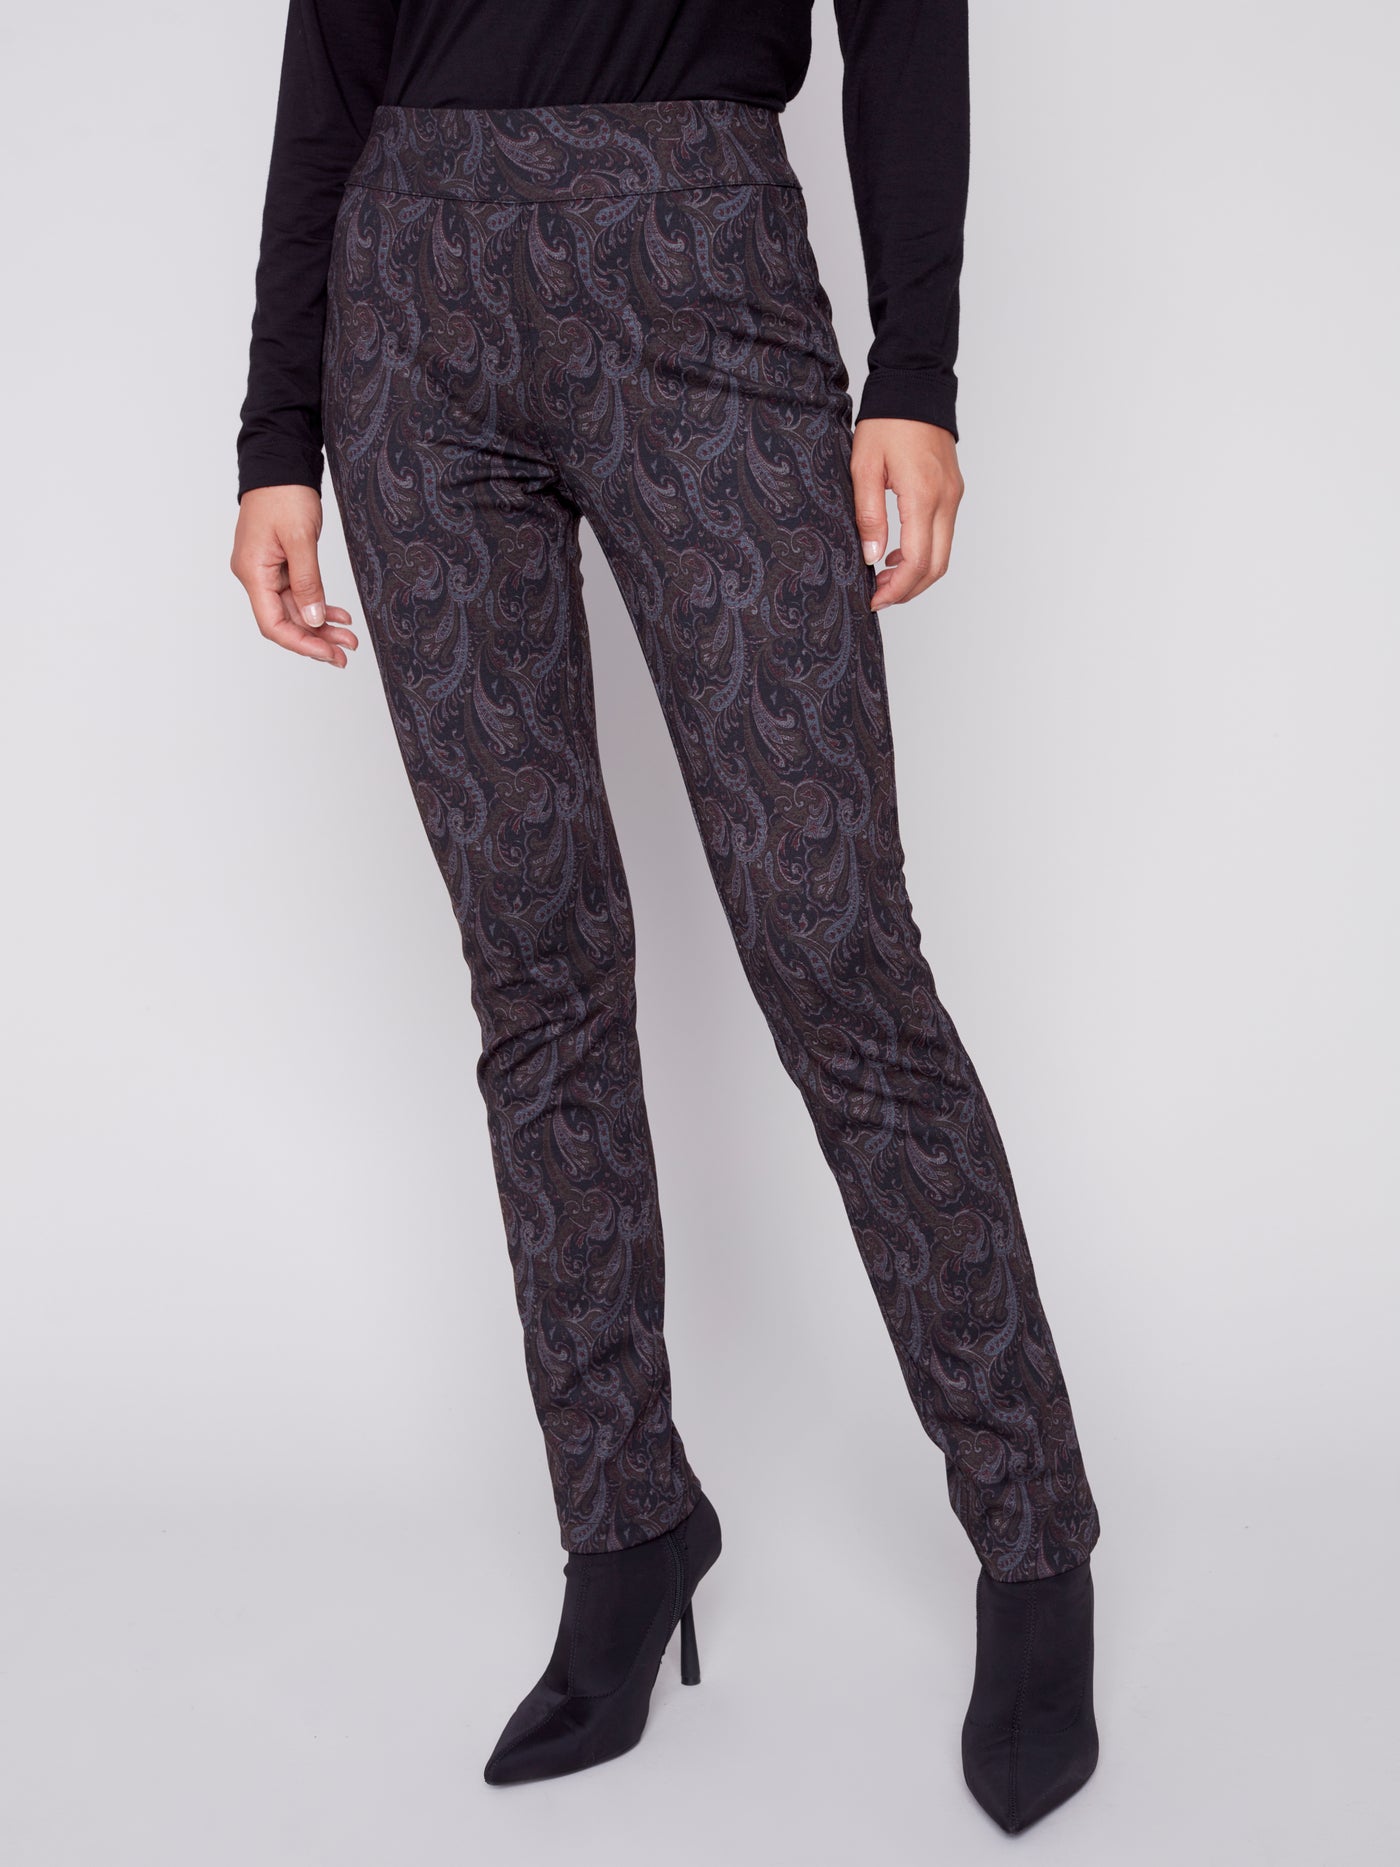 Charlie B Reversible PDR Pull On Pant 